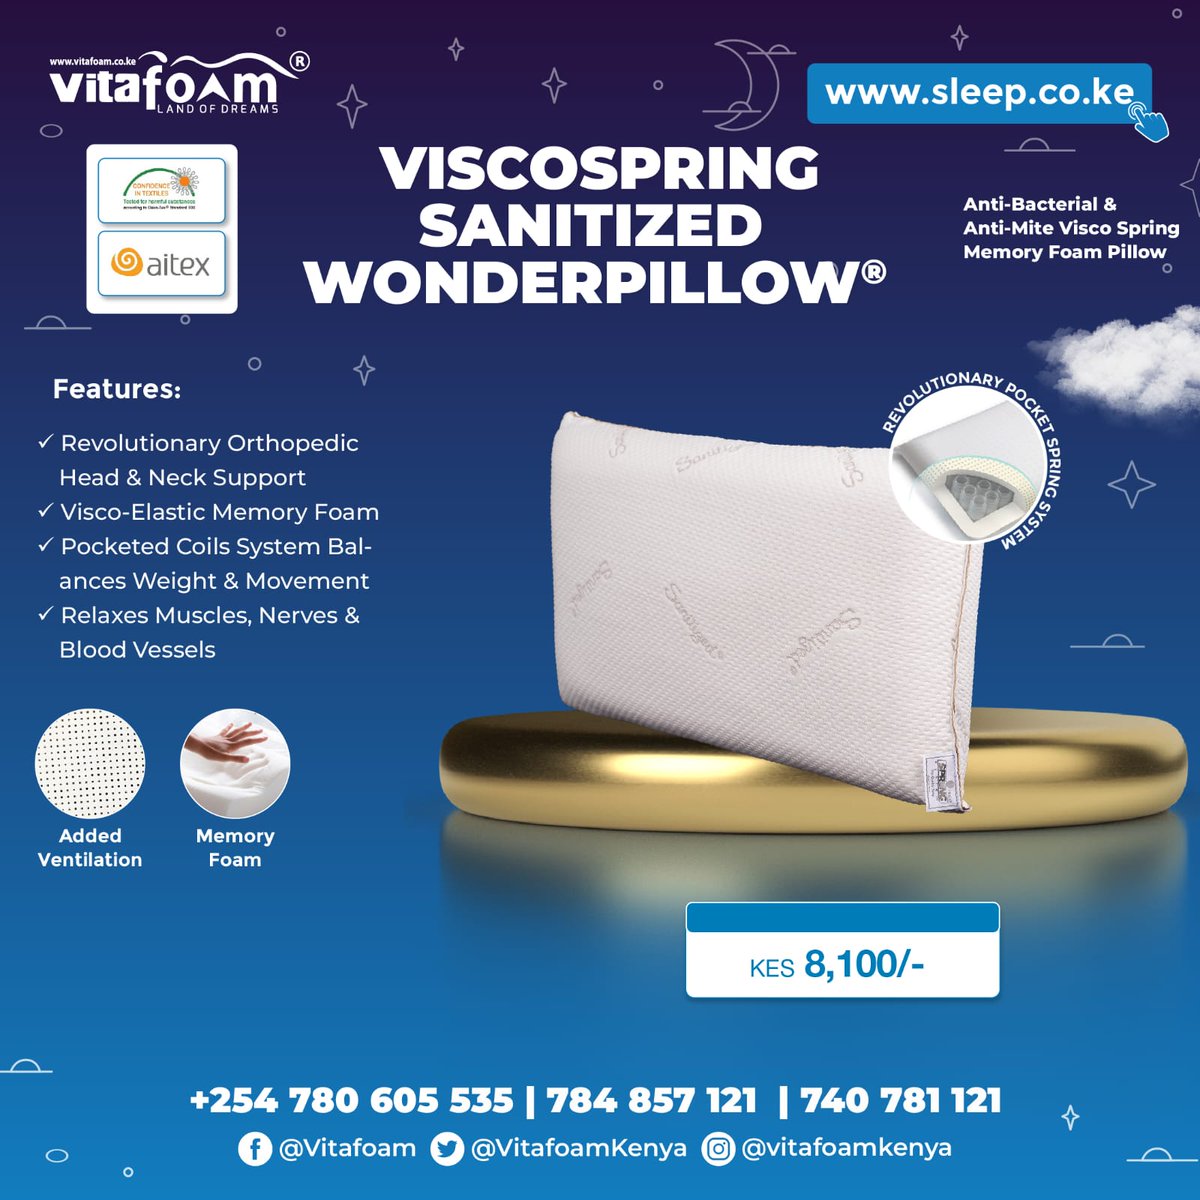 ⭐🙋‍♀️🛌🏾 The Revolutionary ViscoSpring Sanitized WonderPillow® now Exclusively available only at VitaFoam® Kenya! 🛌🏾🙋‍♂️⭐ ☎ For All *Enquiries, *Orders, & *Deliveries: +254 780 605 535 | 740 781 121 📍Locations >> bit.ly/30VqOrf